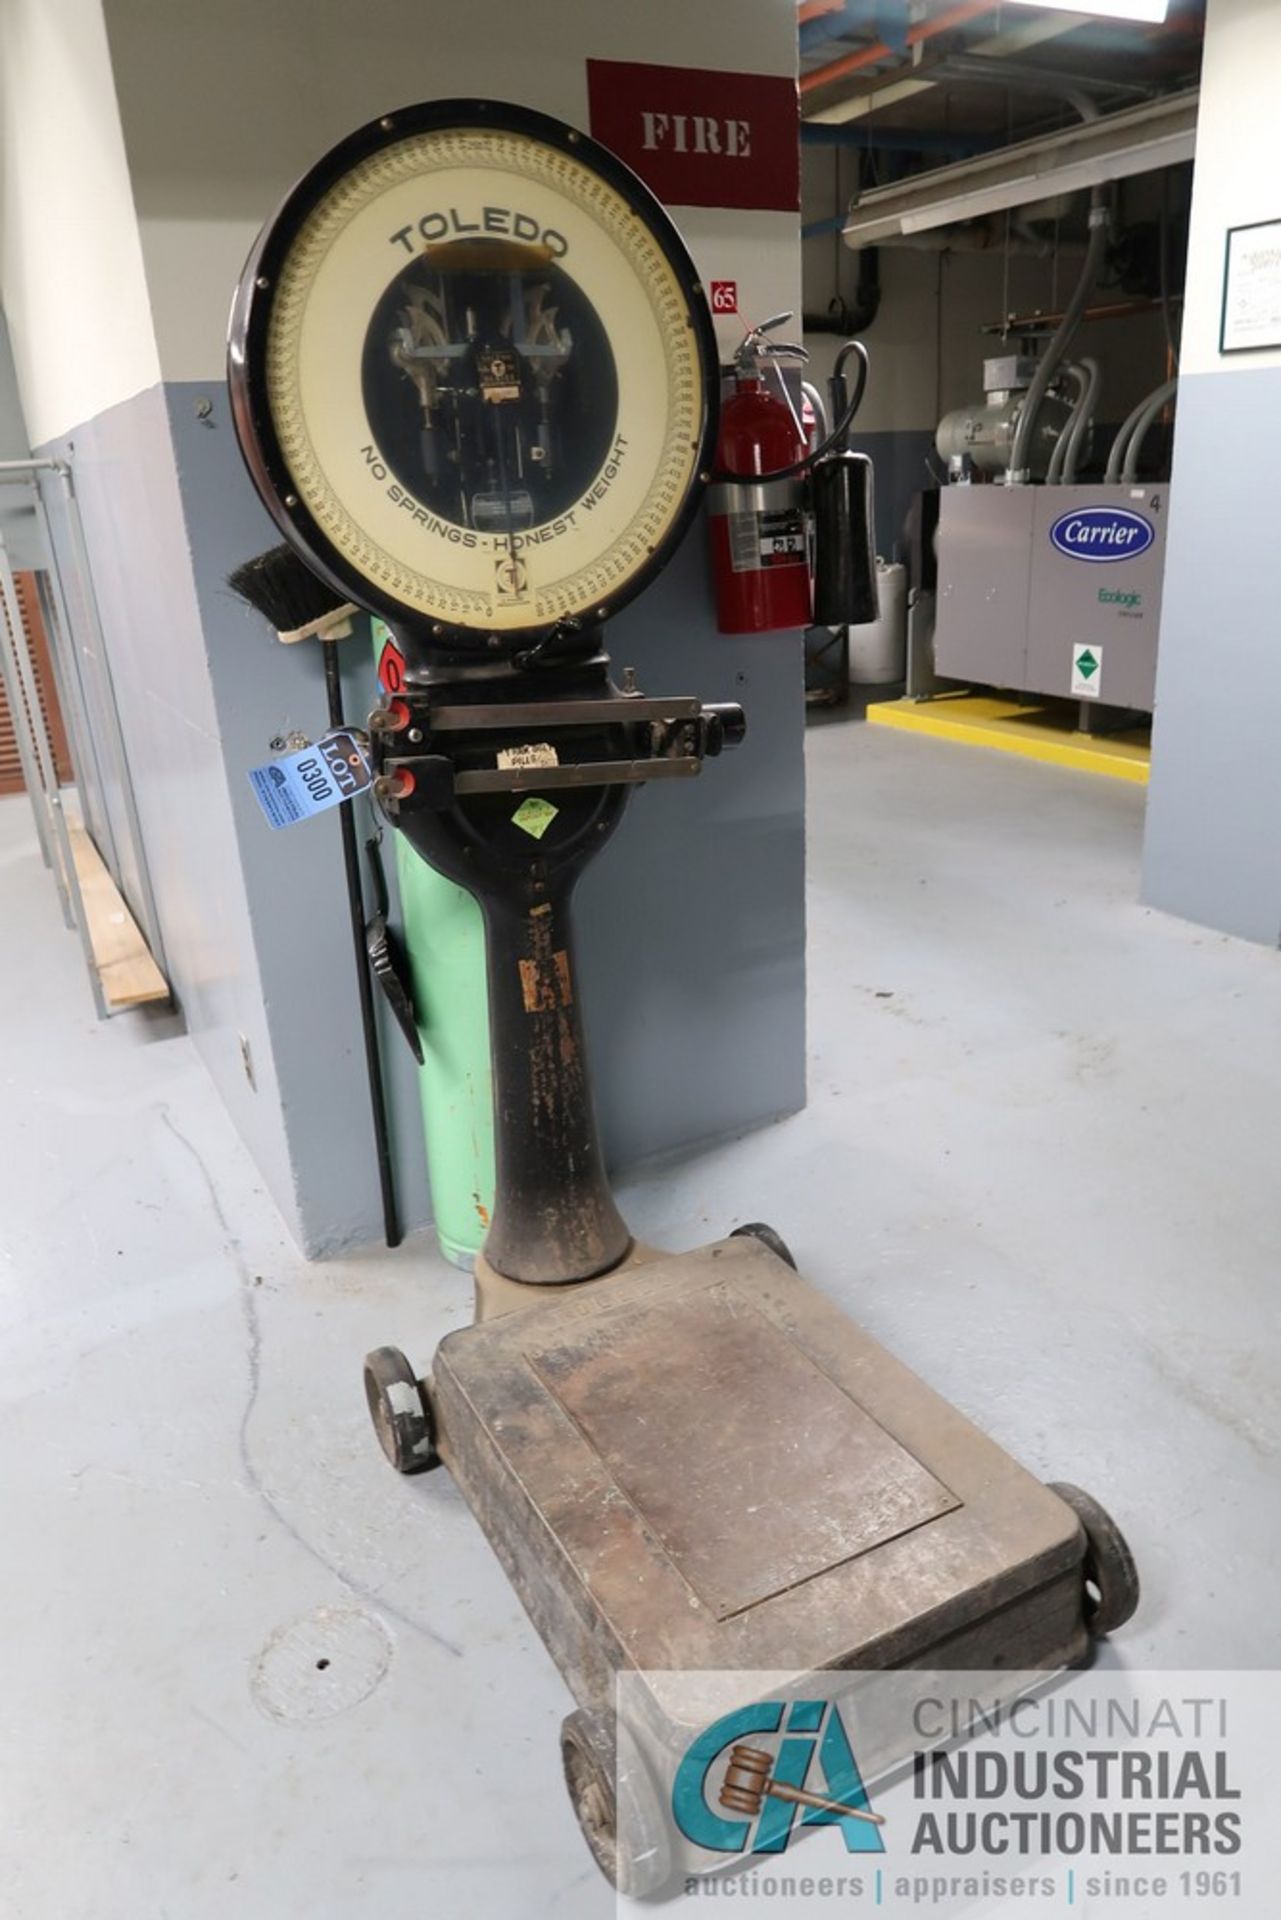 800 LB TOLEDO MODEL 31-1821-FD PORTABLE PLATFORM SCALE; S/N 10521 **LOCATED IN BASEMENT** - Image 2 of 3